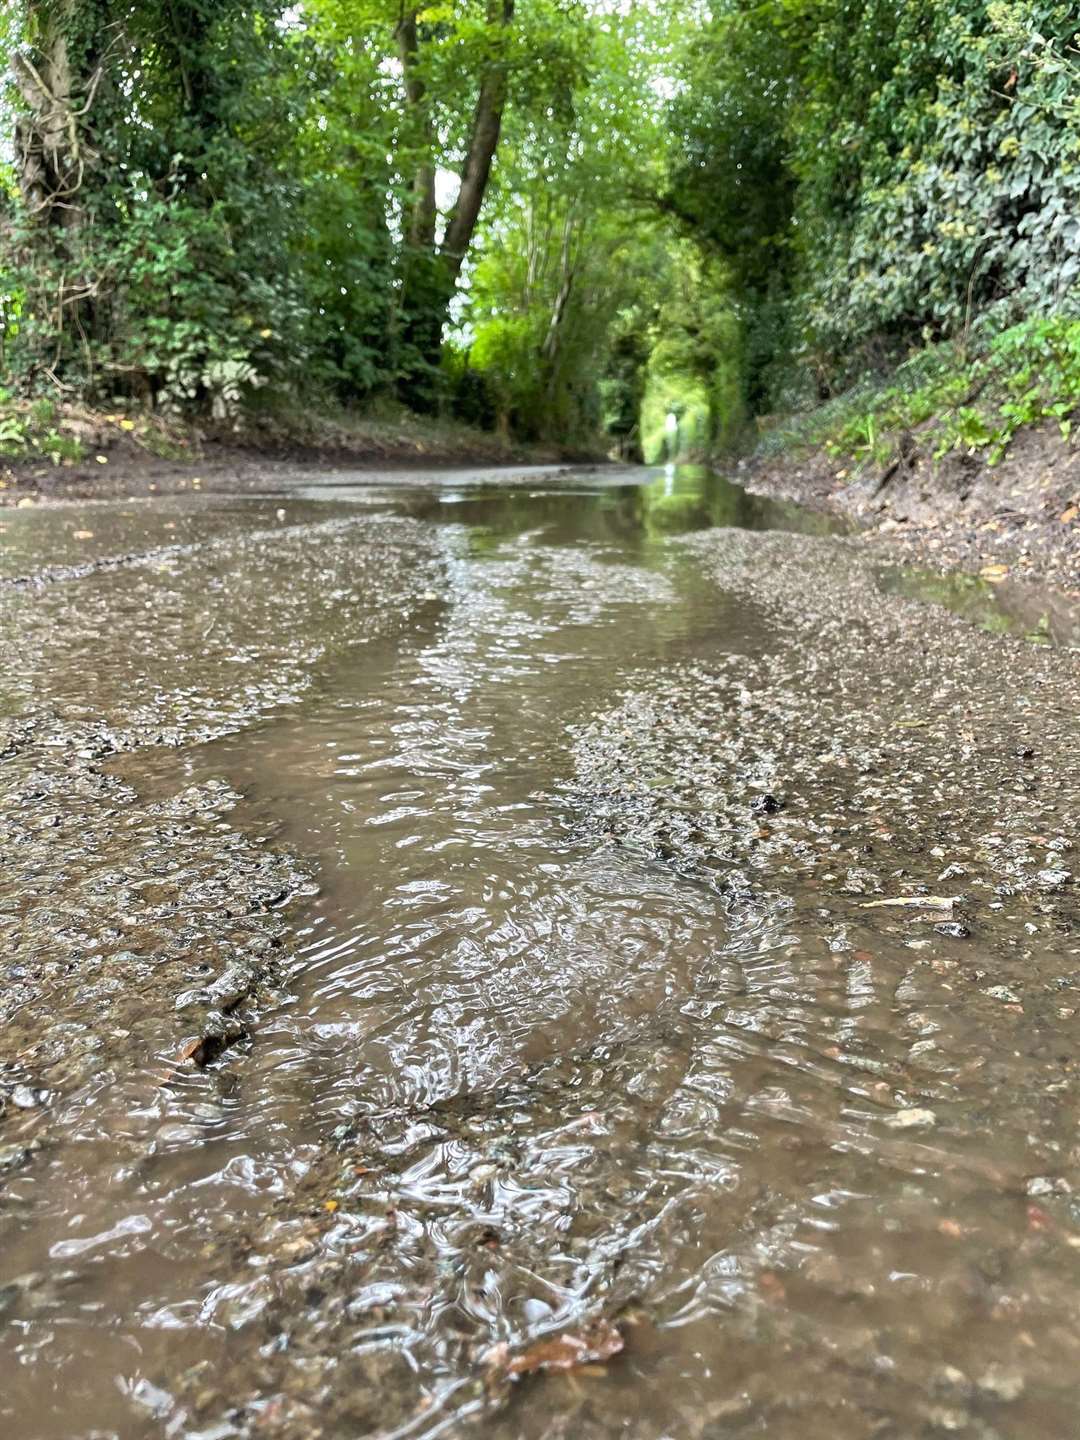 The leak in Idleigh Court Road, Meopham, has still not been fixed